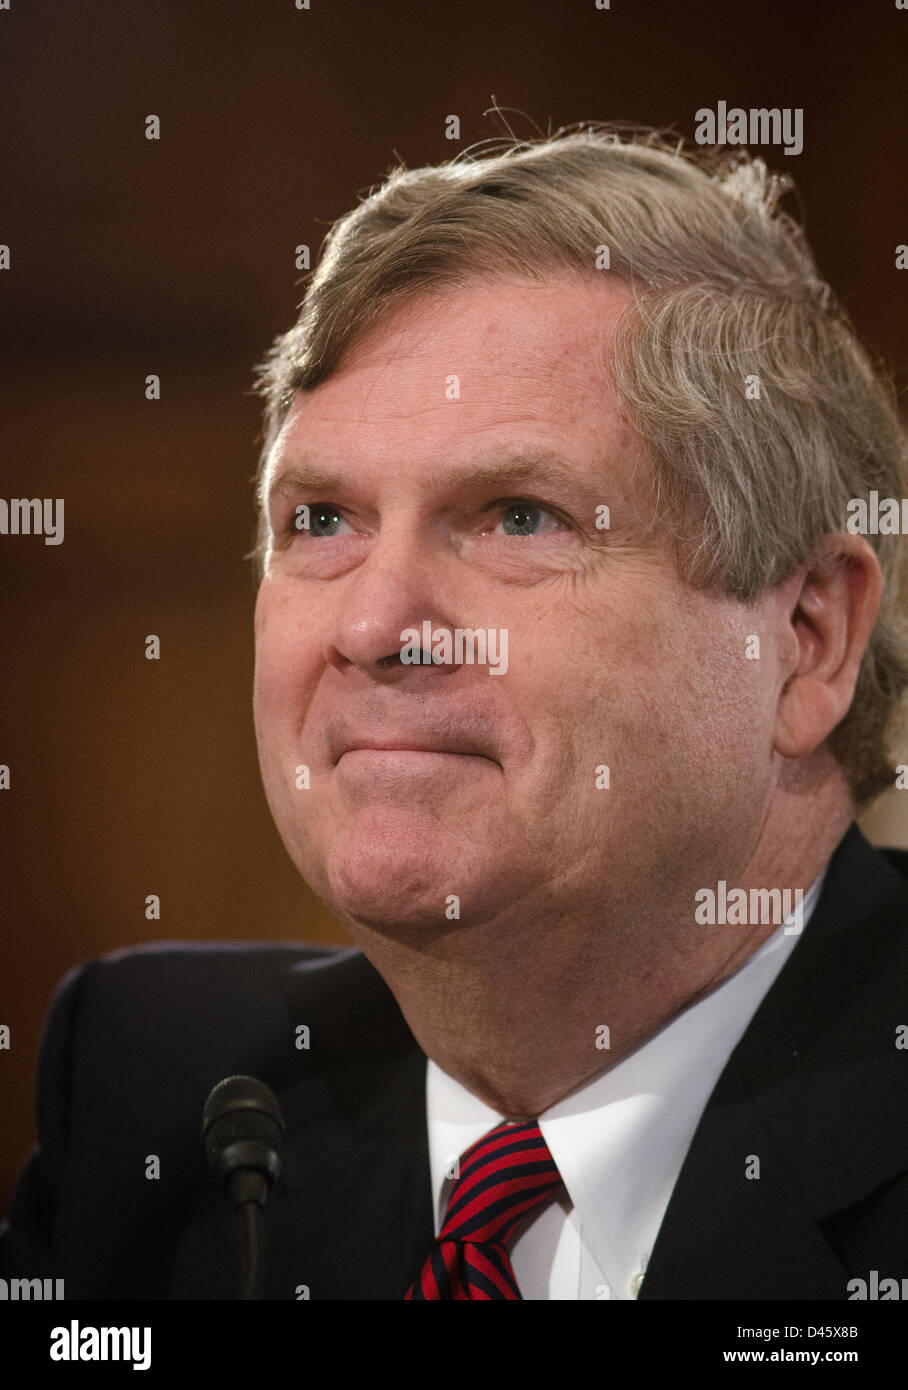 US Agriculture Secretary Tom Vilsack testifies before the House Agriculture Committee regarding the State of the Rural Economy at the Longworth House Office Building March 5, 2013 in Washington, DC. Stock Photo